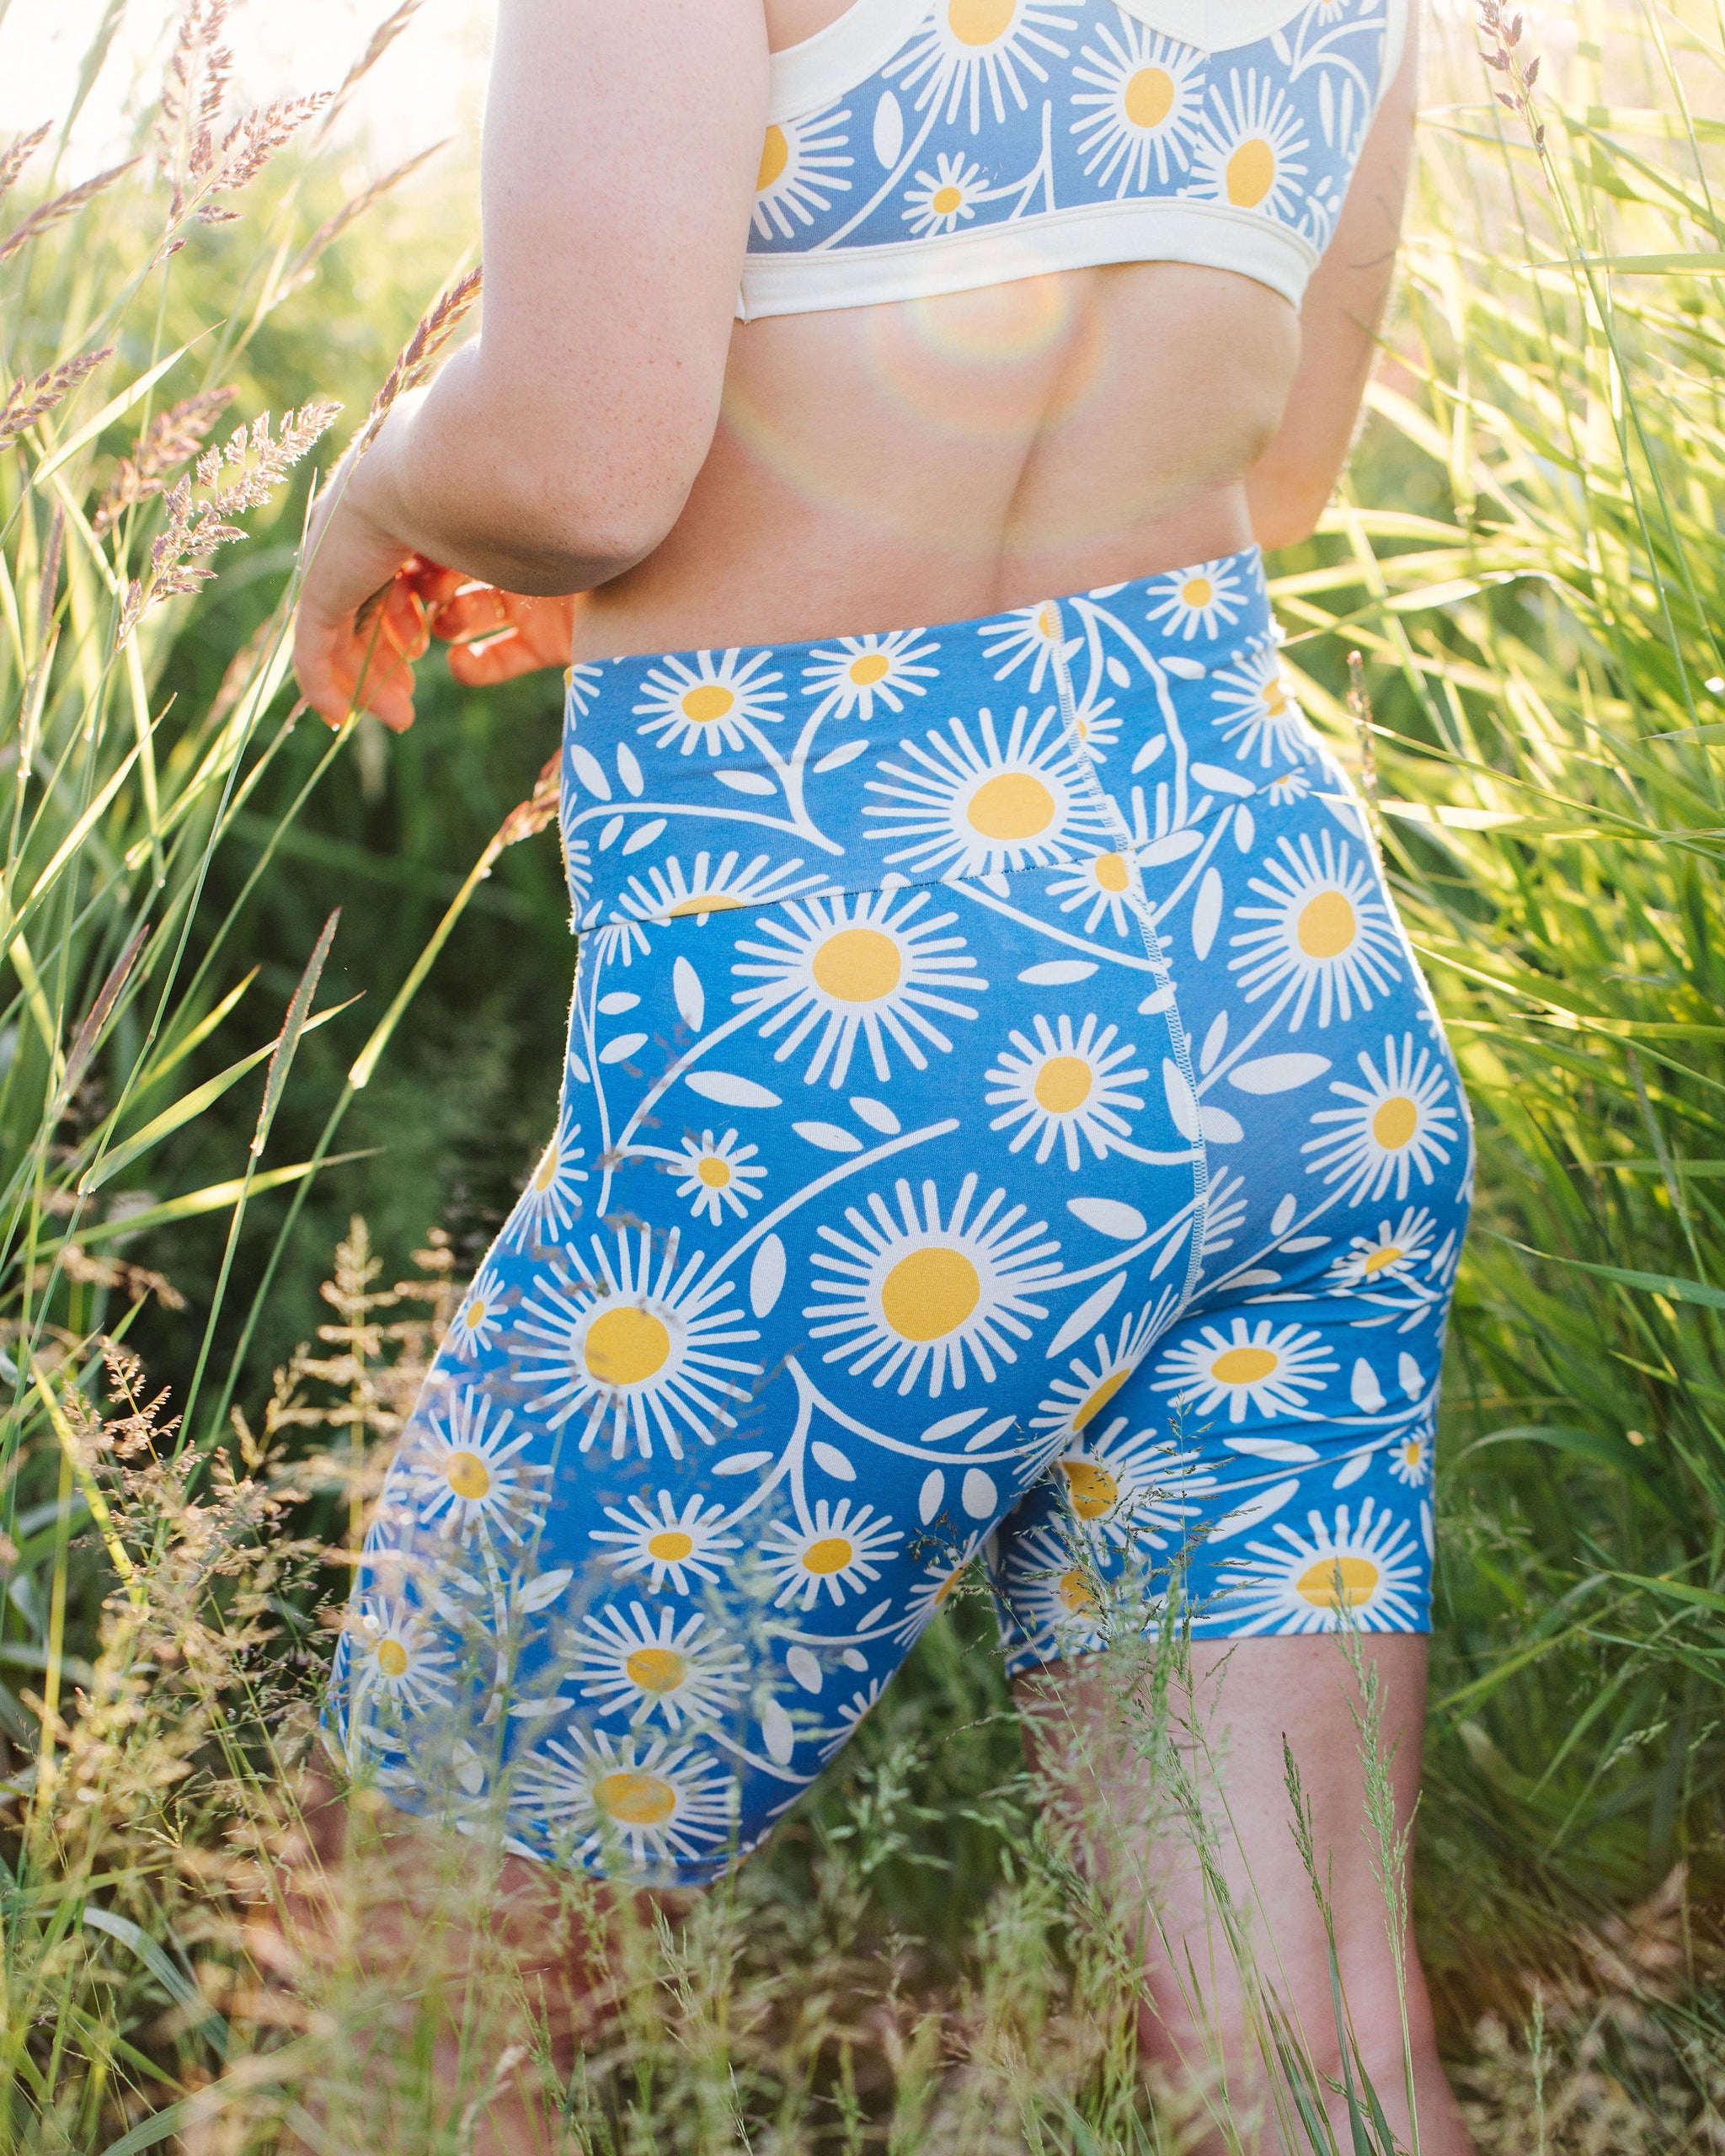 Close up of model in a field wearing Thunderpants Bike Shorts in Daisy Days print: blue with white and yellow daisies.